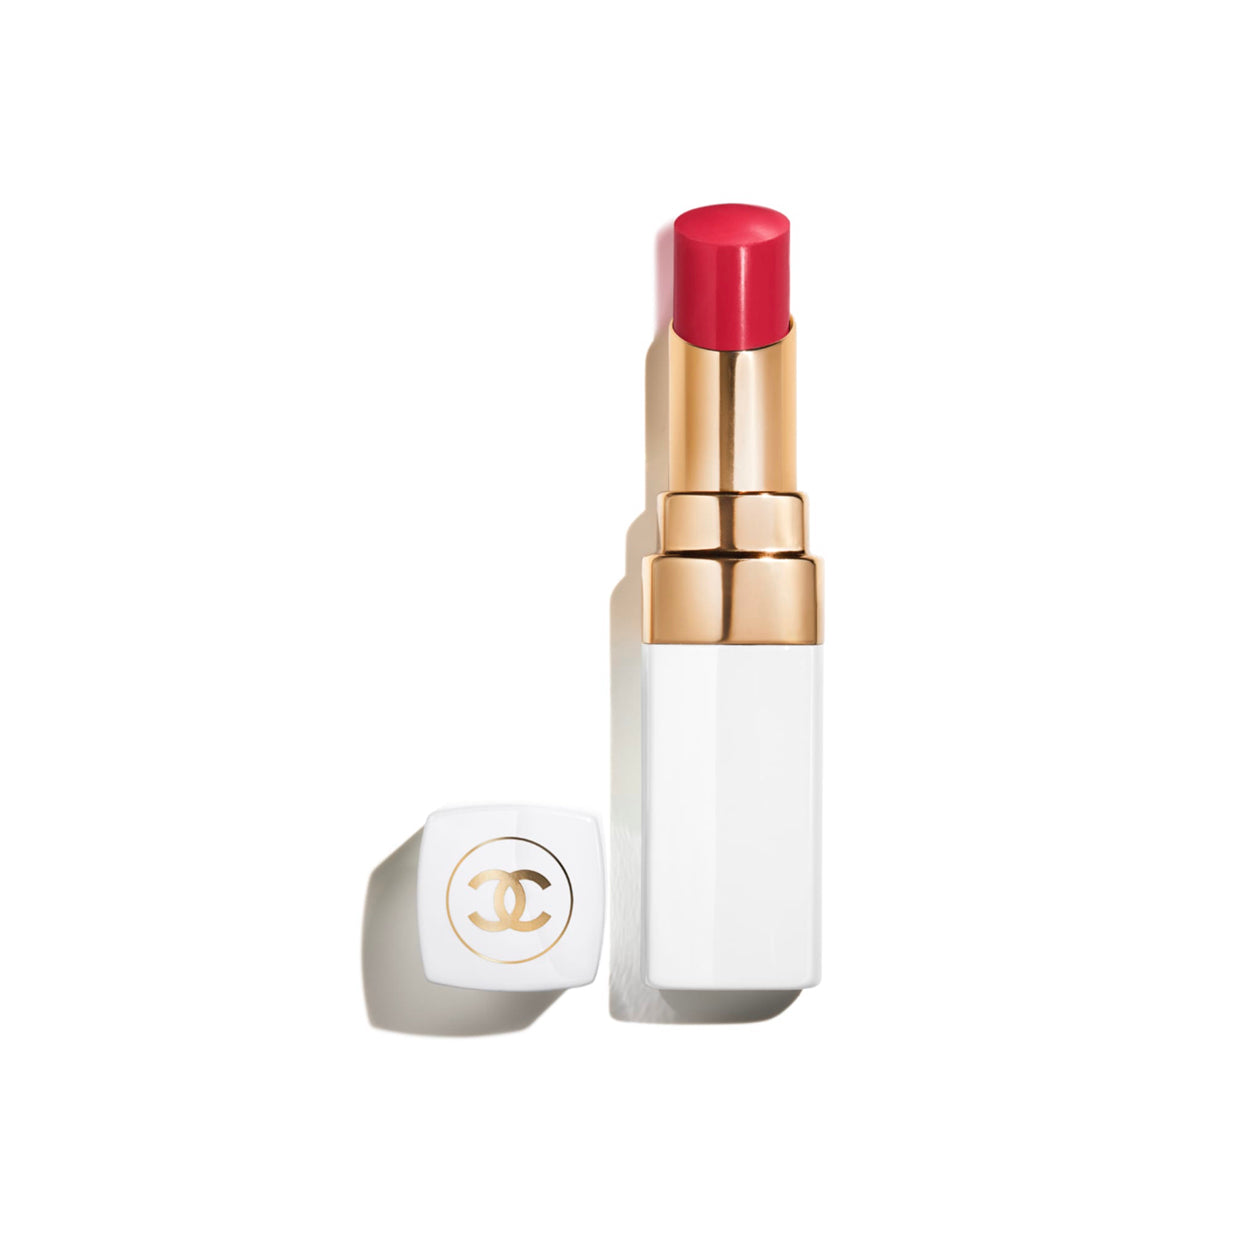 CHANEL, ROUGE COCO BAUME